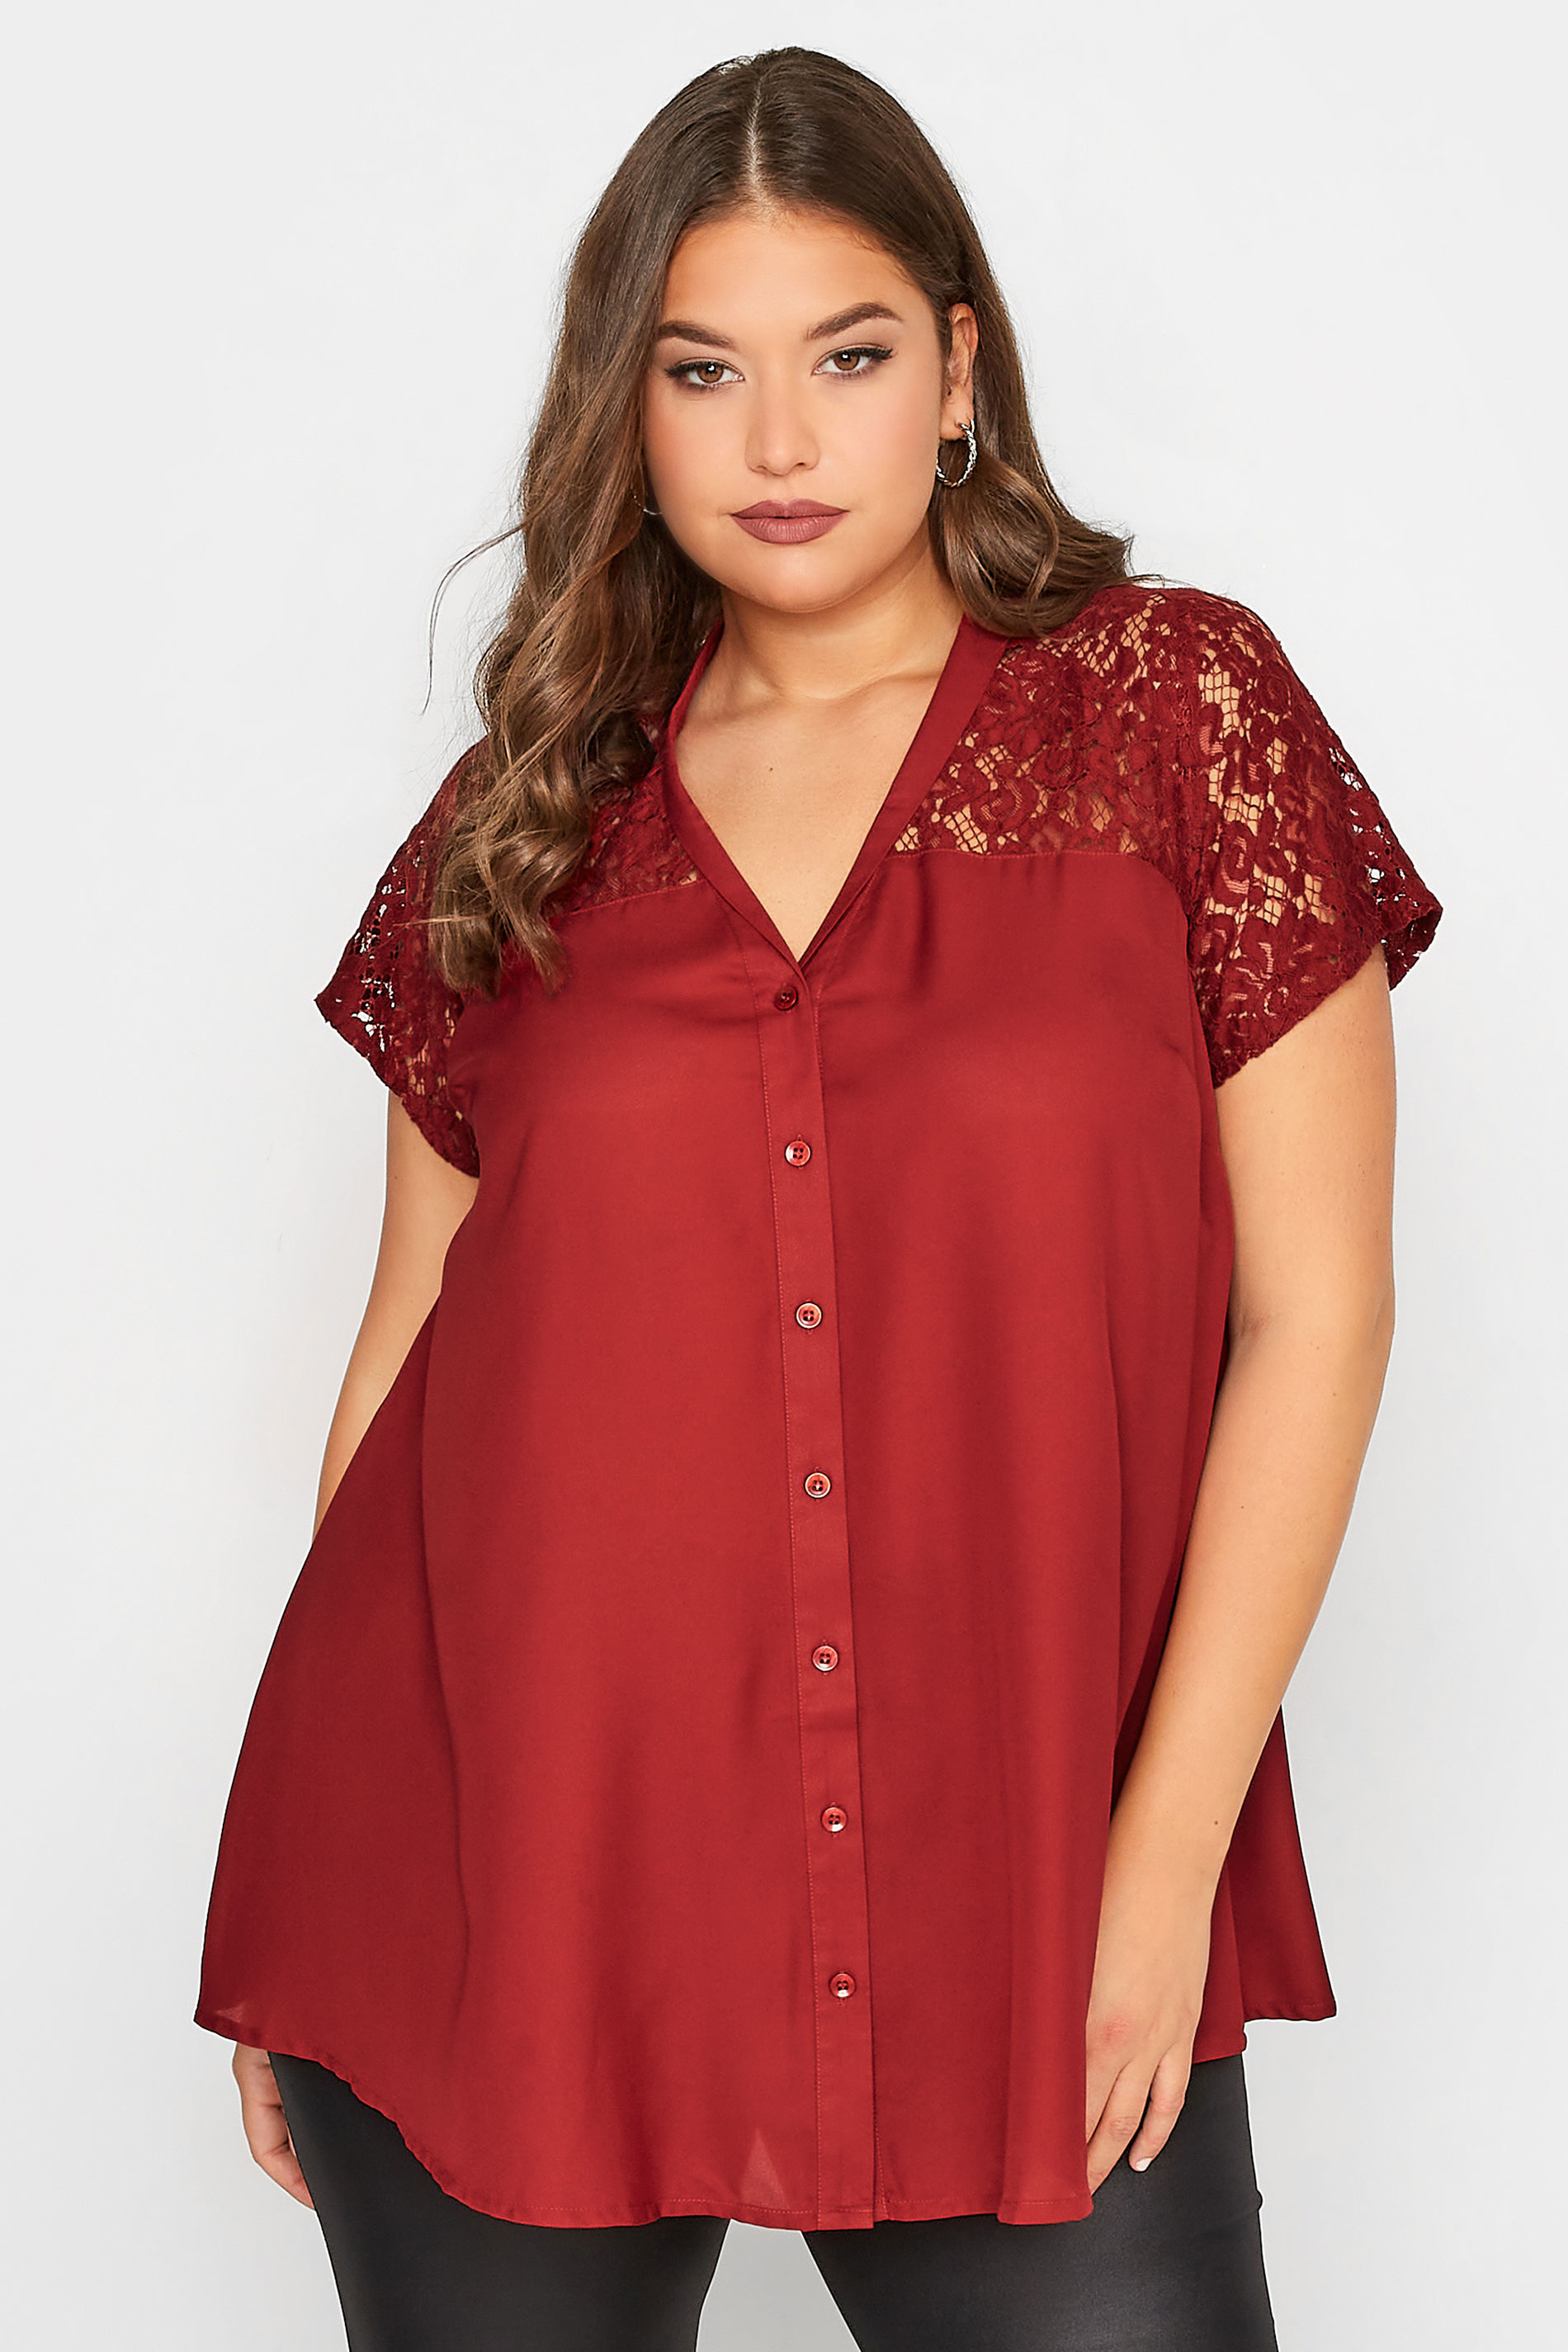 LIMITED COLLECTION Plus Size Wine Red Lace Insert Blouse | Yours Clothing 1